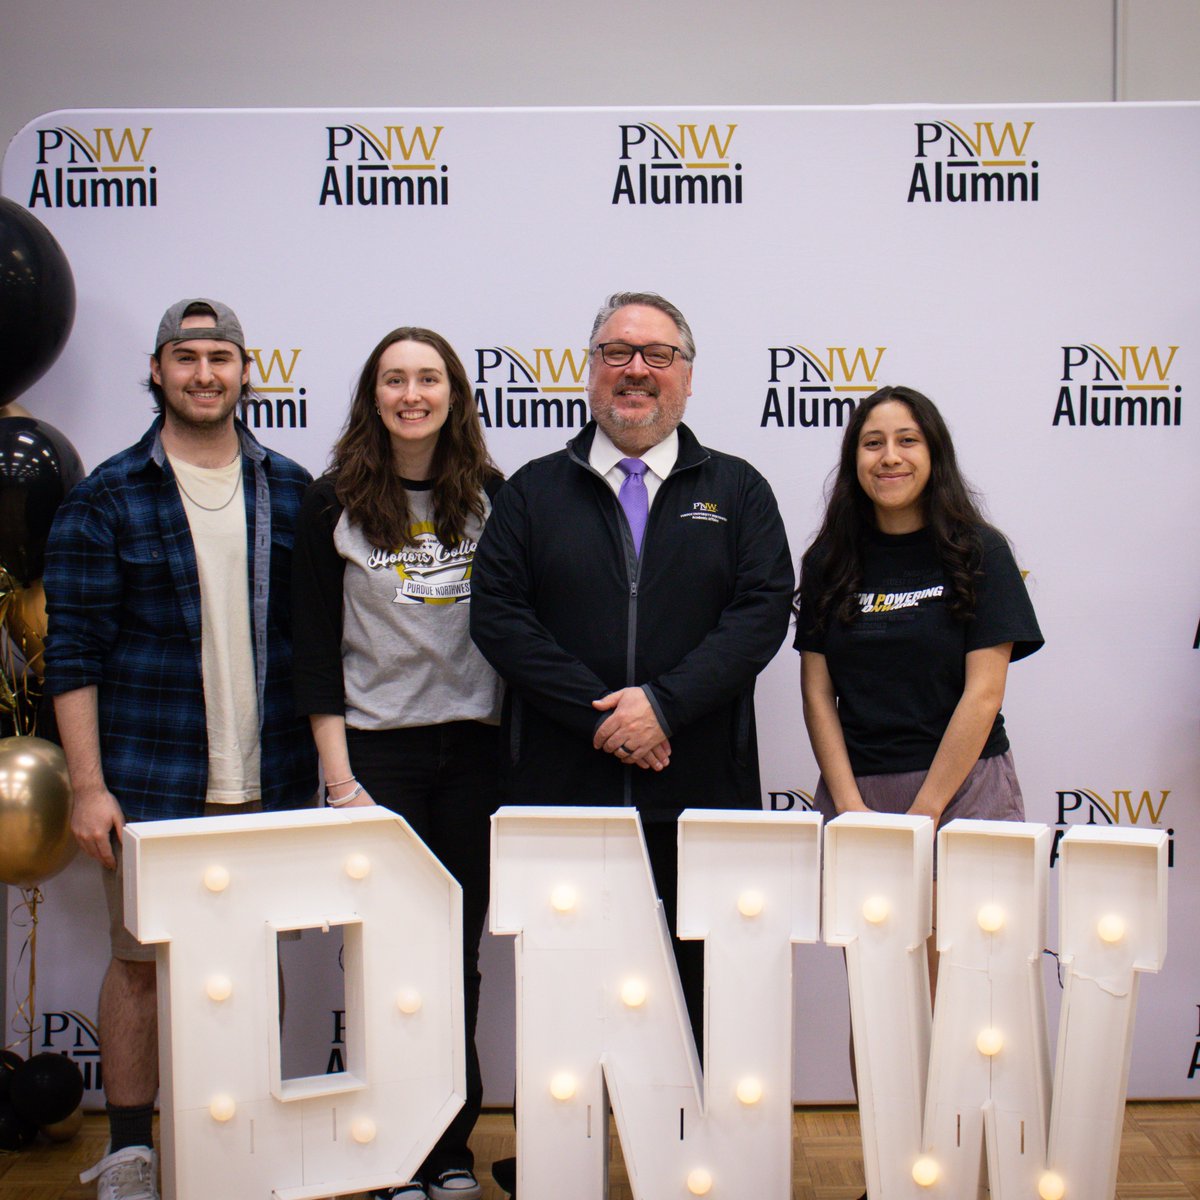 Congrats, #PNWGrads! Wrapping up this semester, the PNW Career Center and PNW Alumni Community celebrated our upcoming graduates at the official PNW Signing Days events. Candidates shared their next steps after graduation and prepared for the upcoming commencement ceremonies.